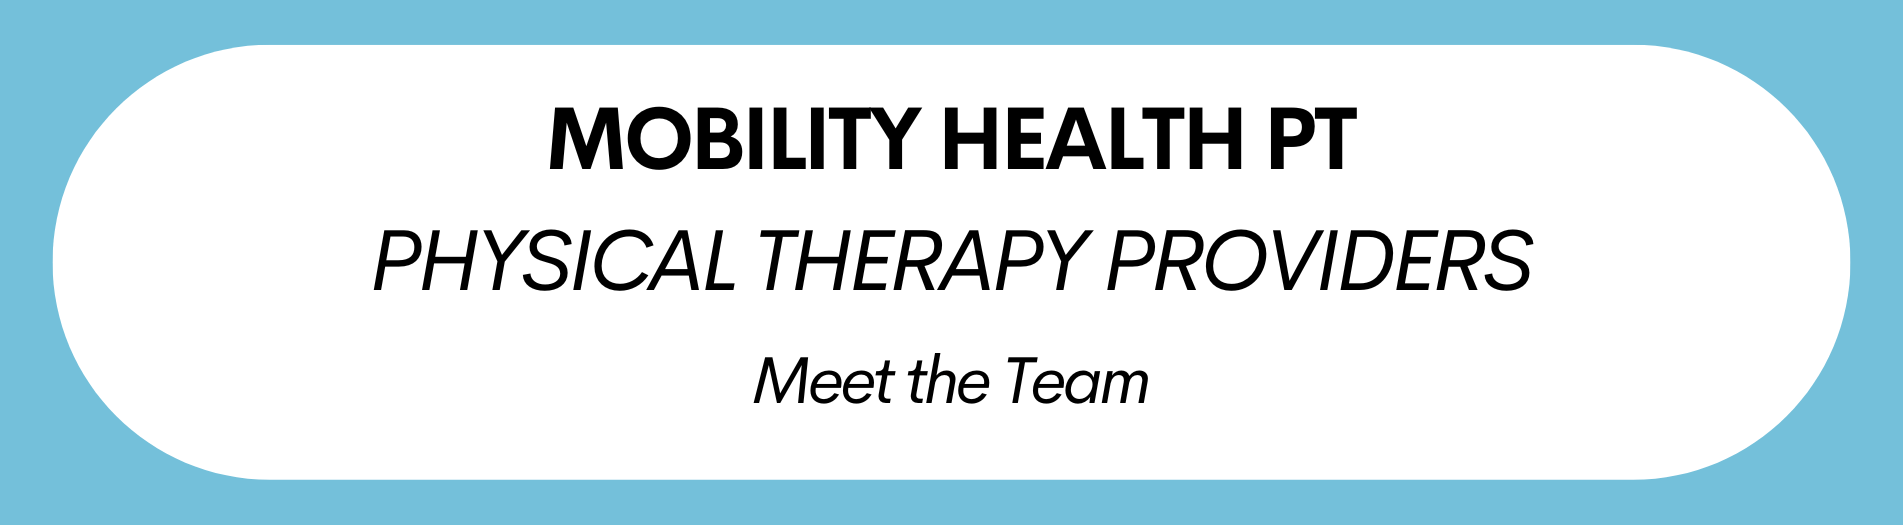 Mobility Health PT Physical Therapy Providers Meet The Team